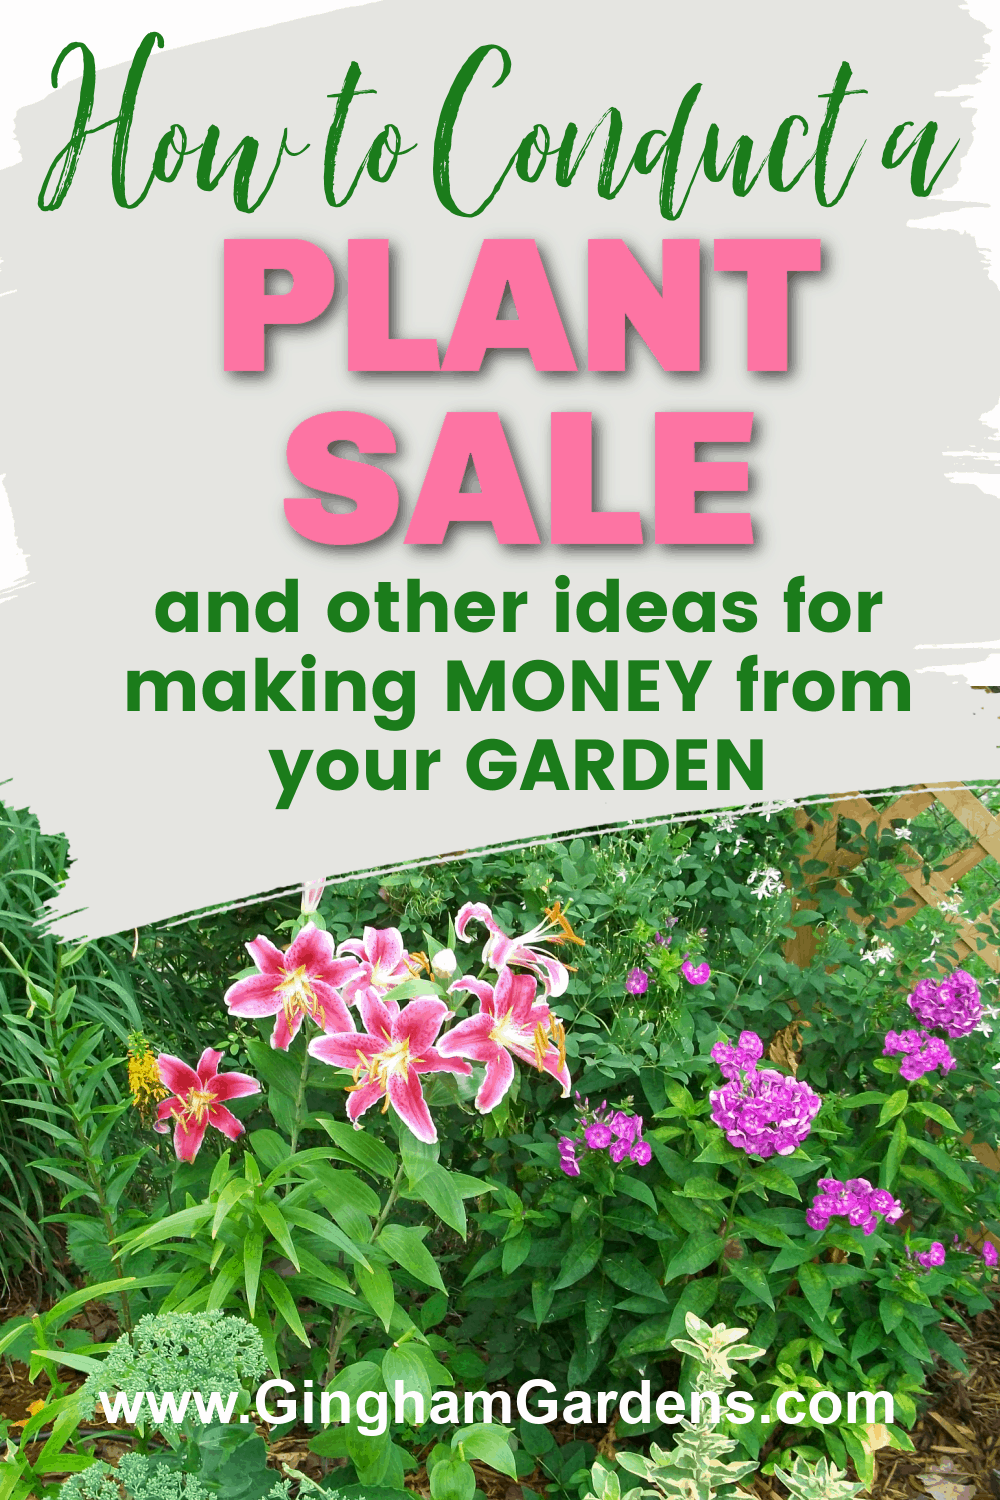 Image of a Flower Garden with Text Overlay - How to Conduct a Plant Sale